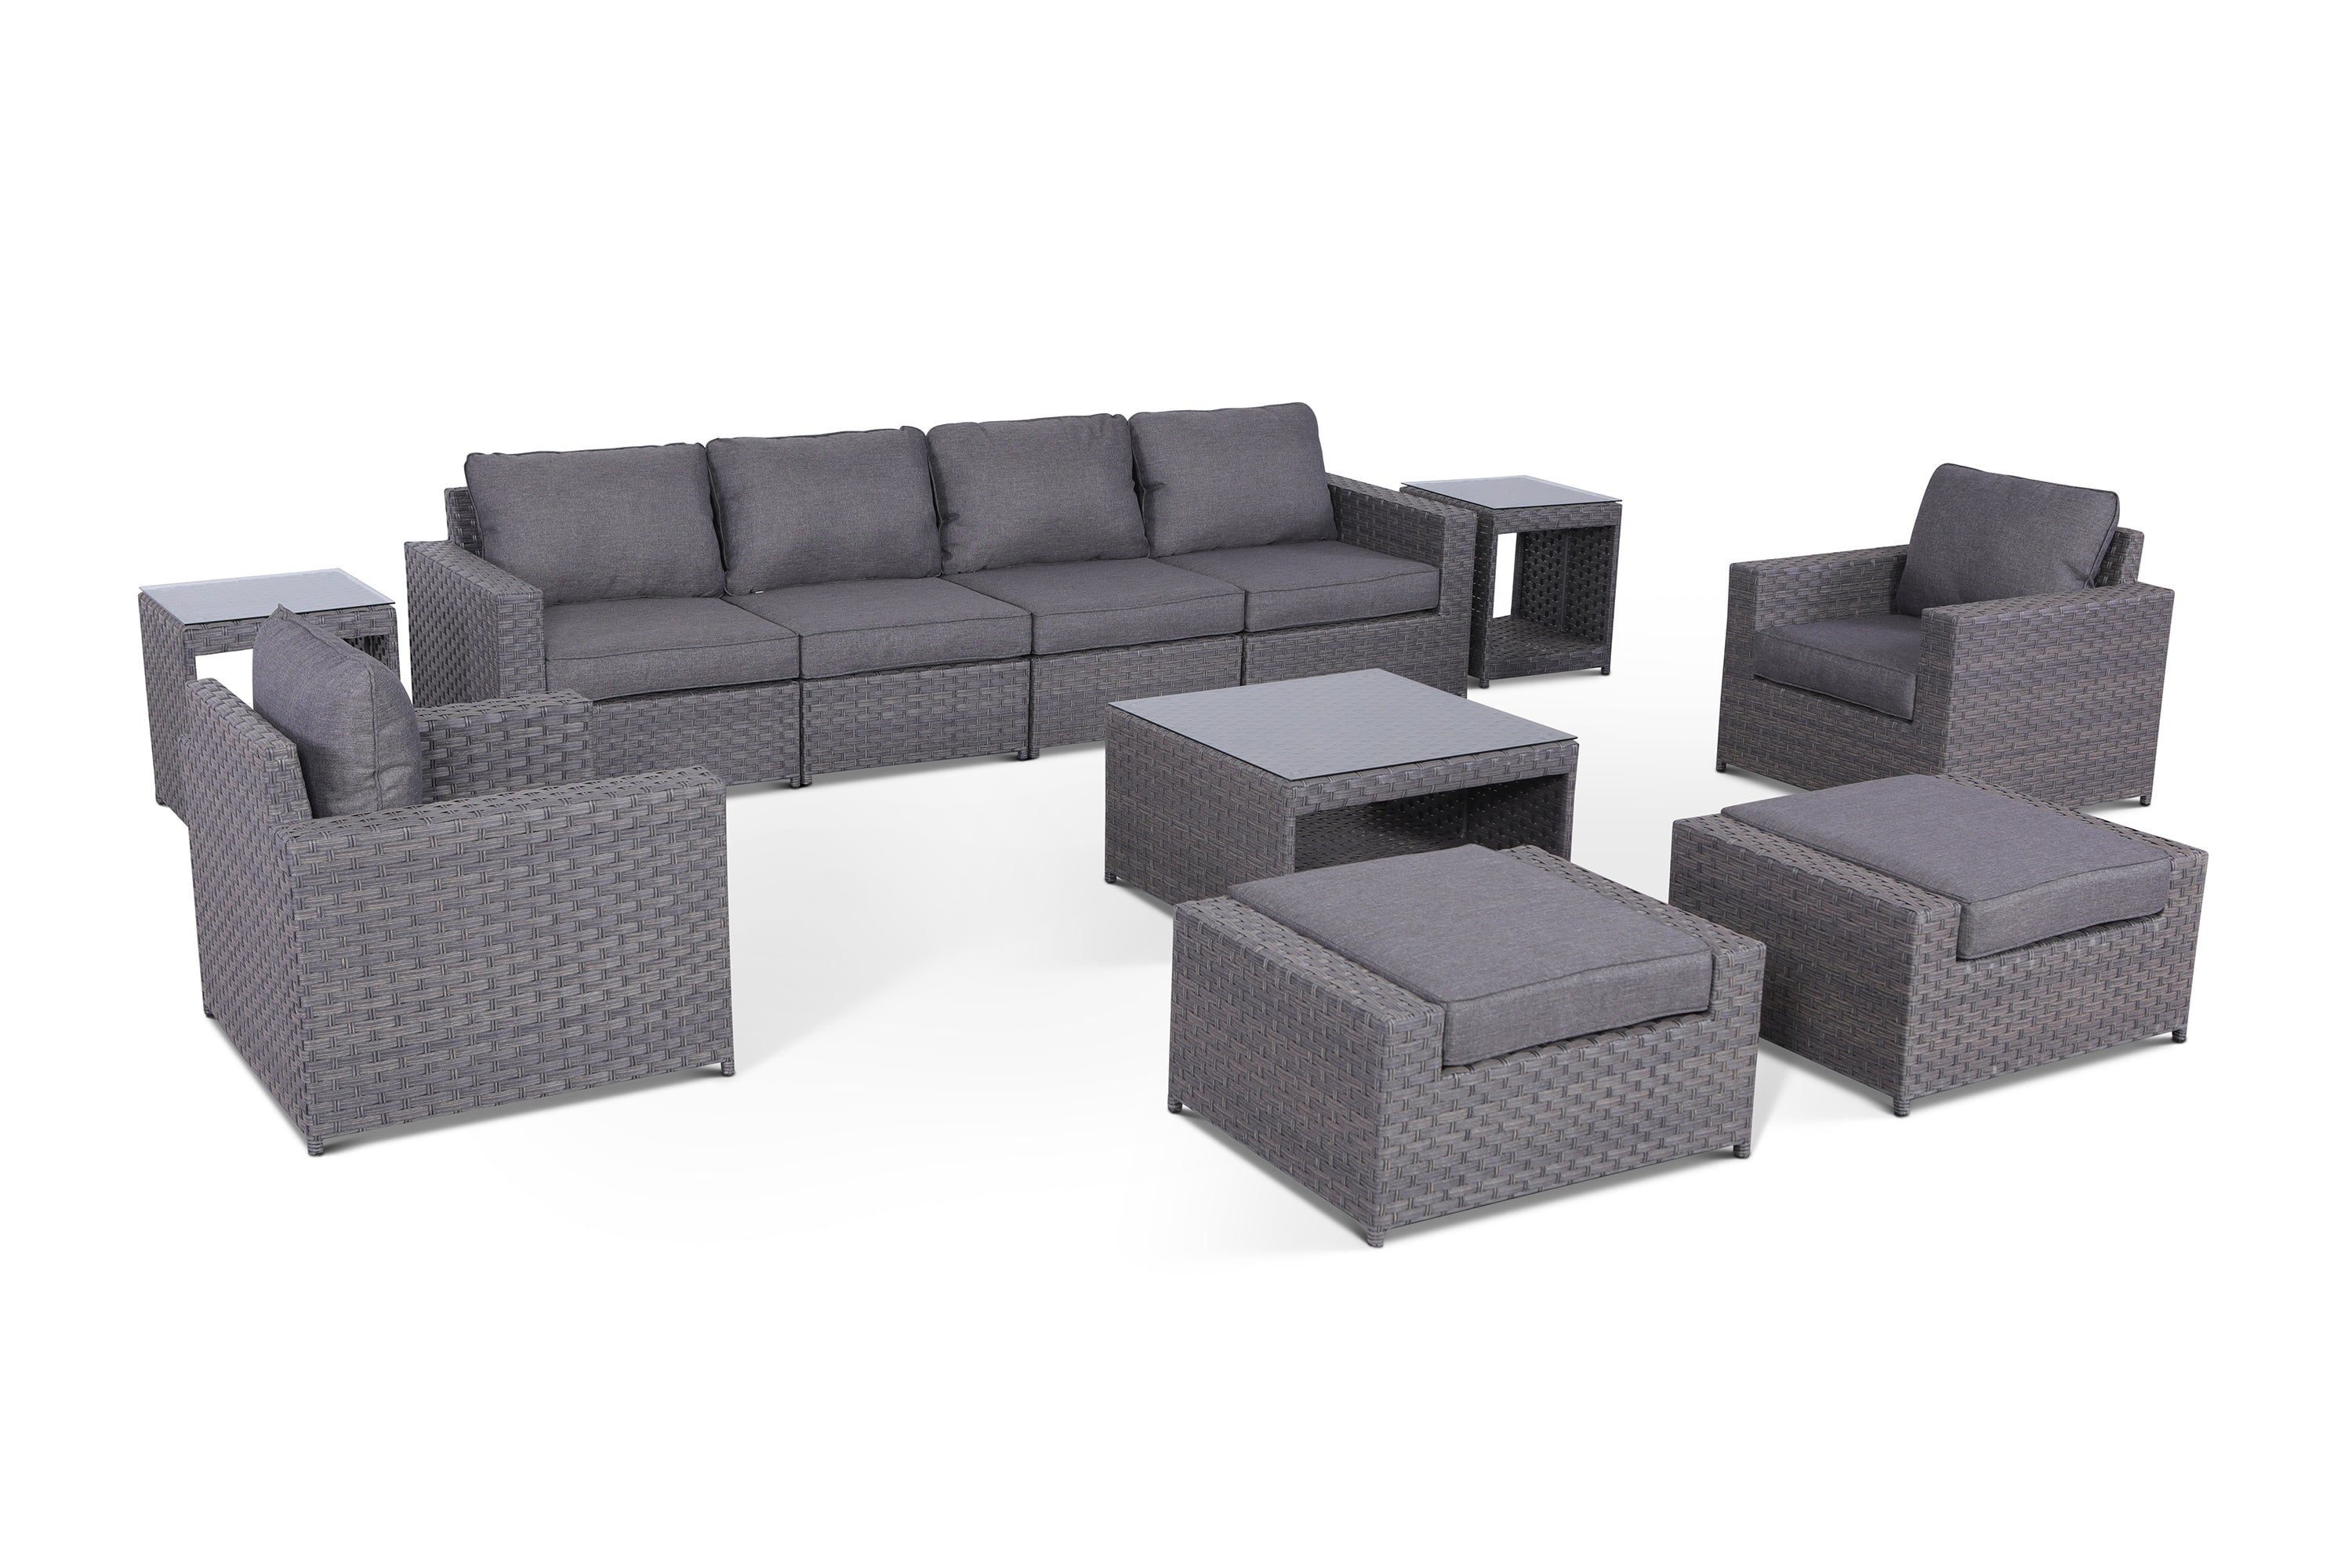 Cromwell 11 Piece Outdoor Wicker Large Sofa Set with End Tables